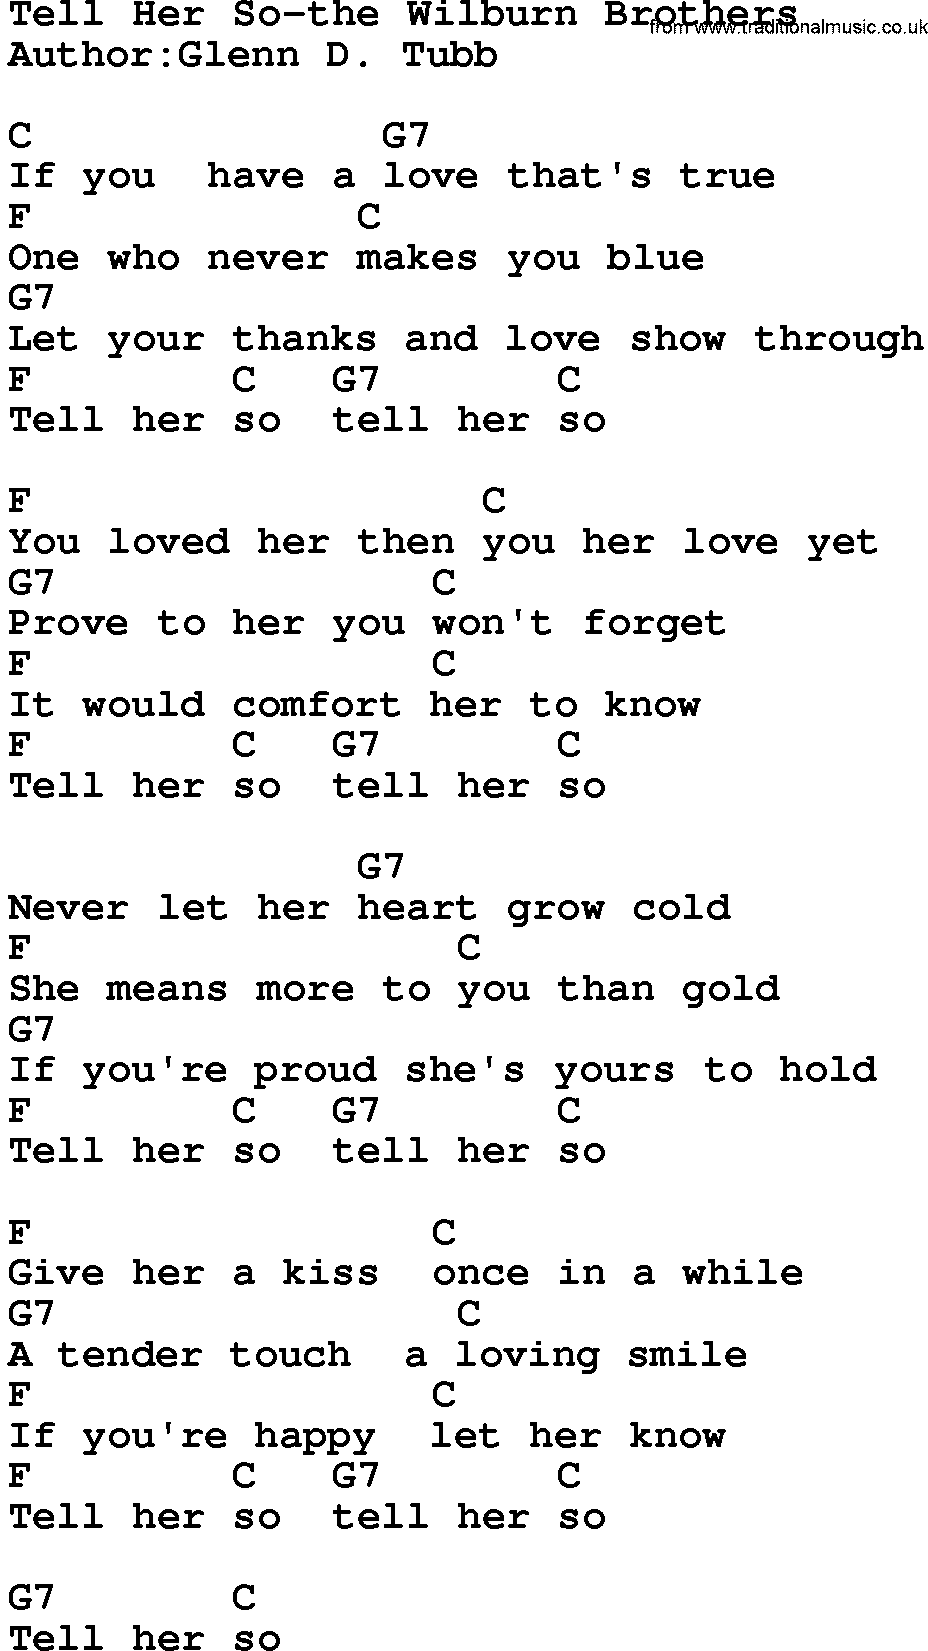 Country music song: Tell Her So-The Wilburn Brothers lyrics and chords